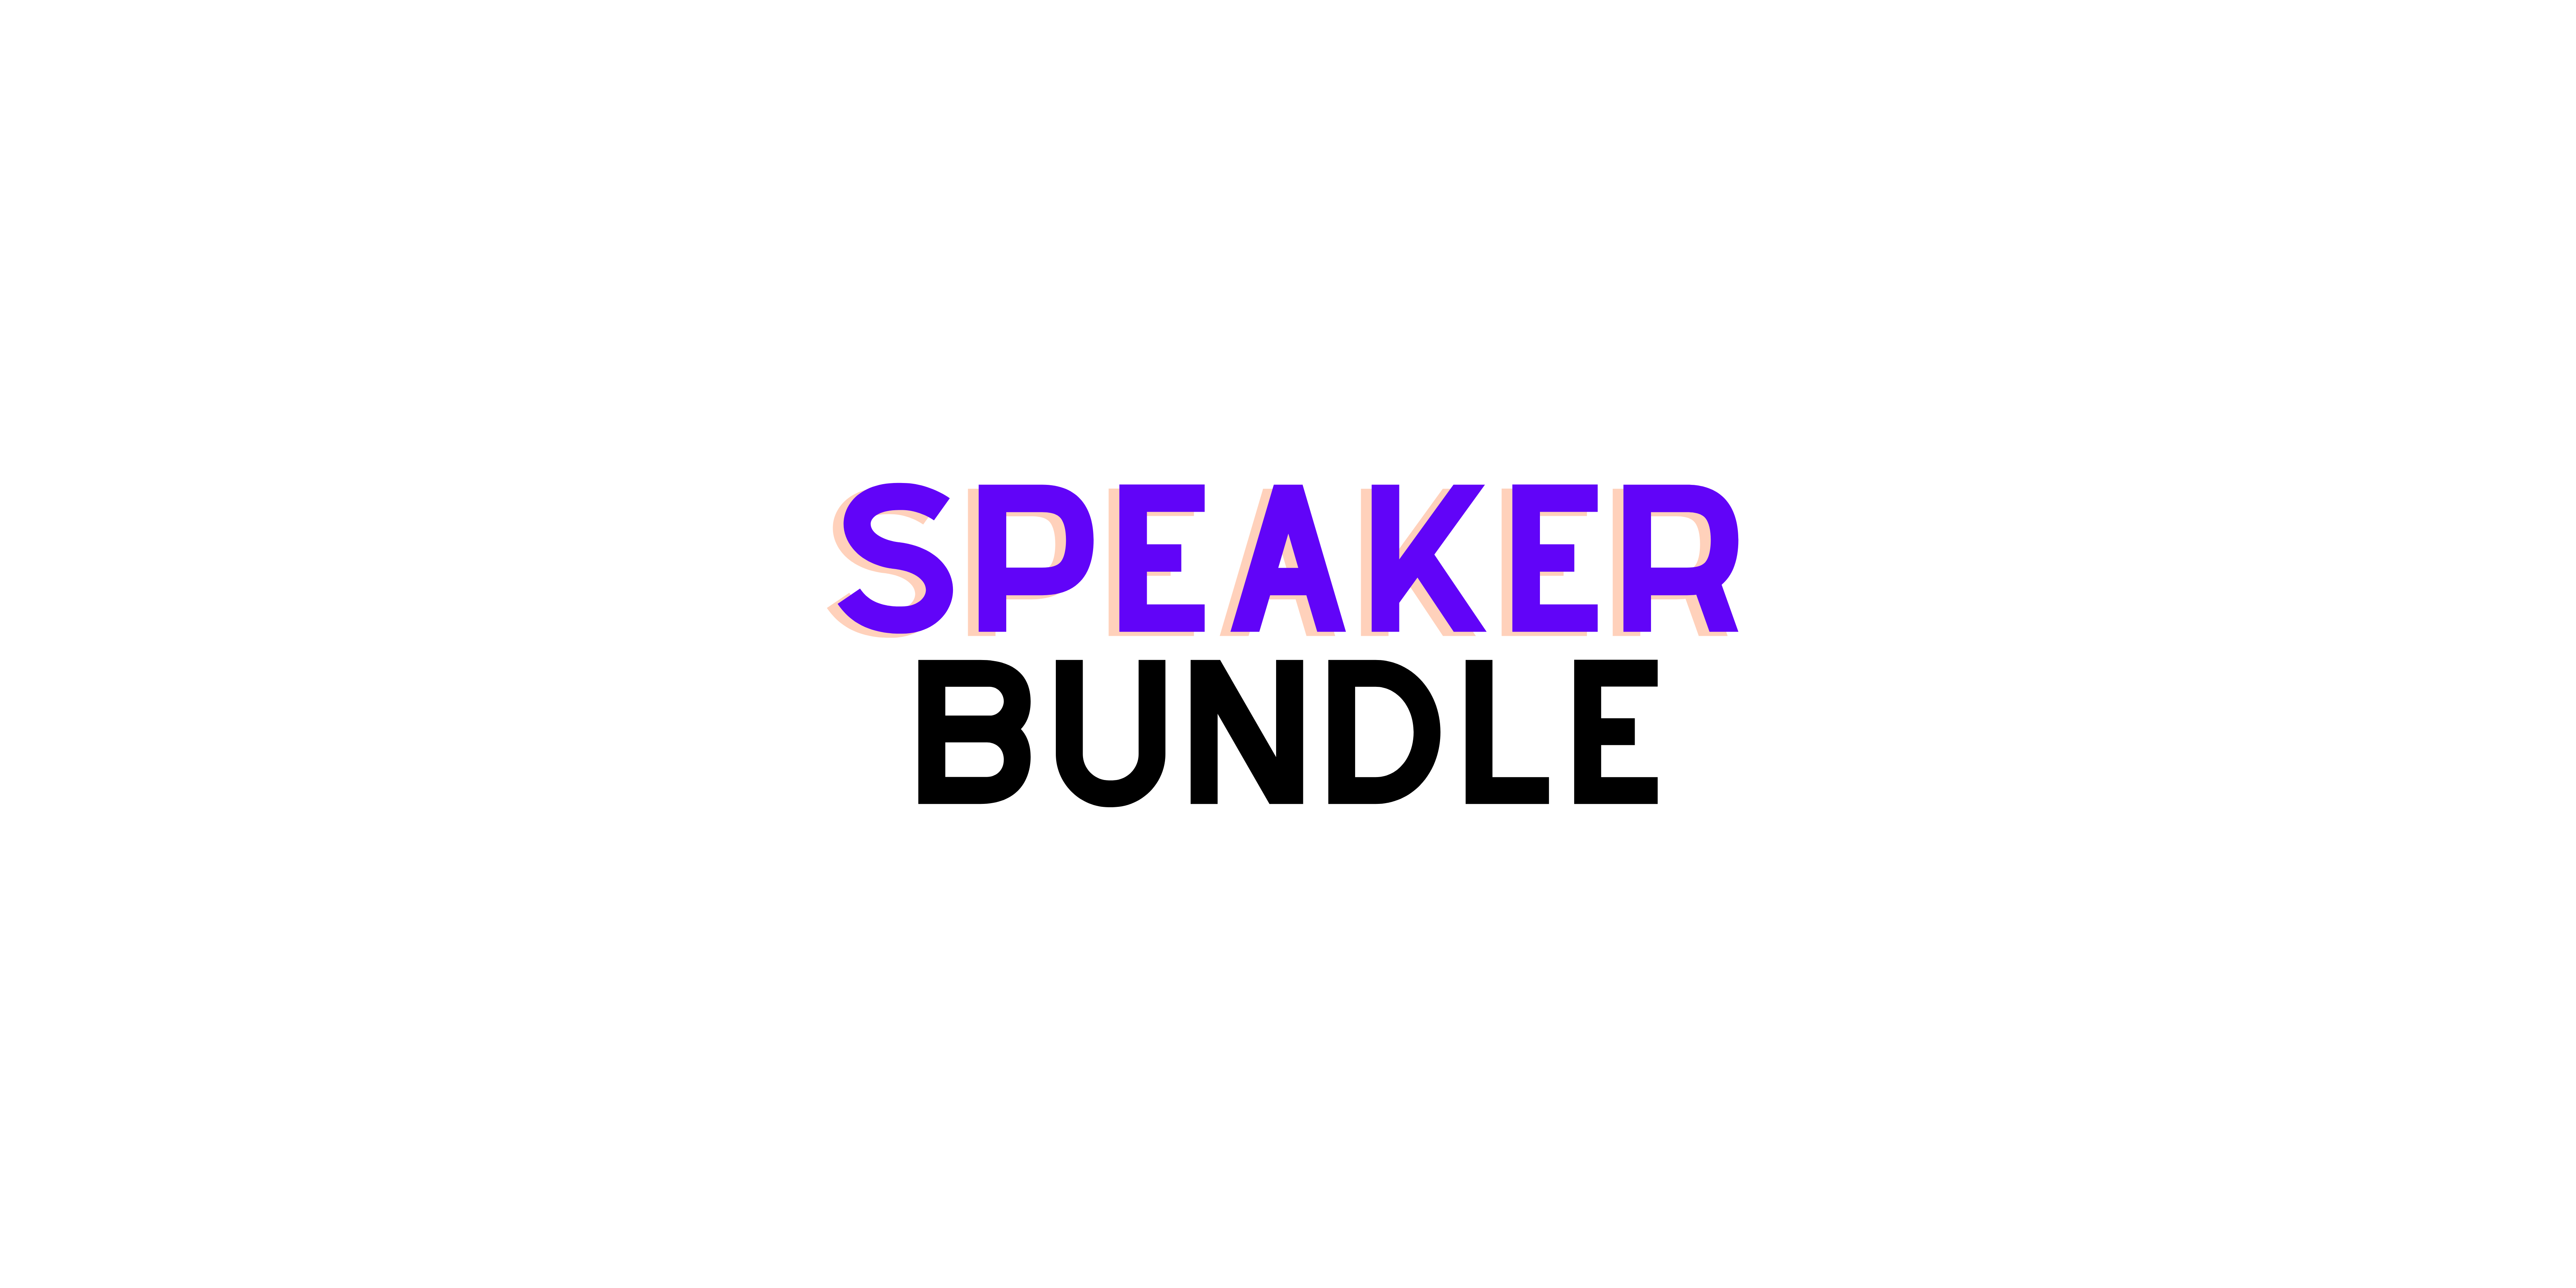 how to become a paid speaker, how to make money speaking, how to sell books